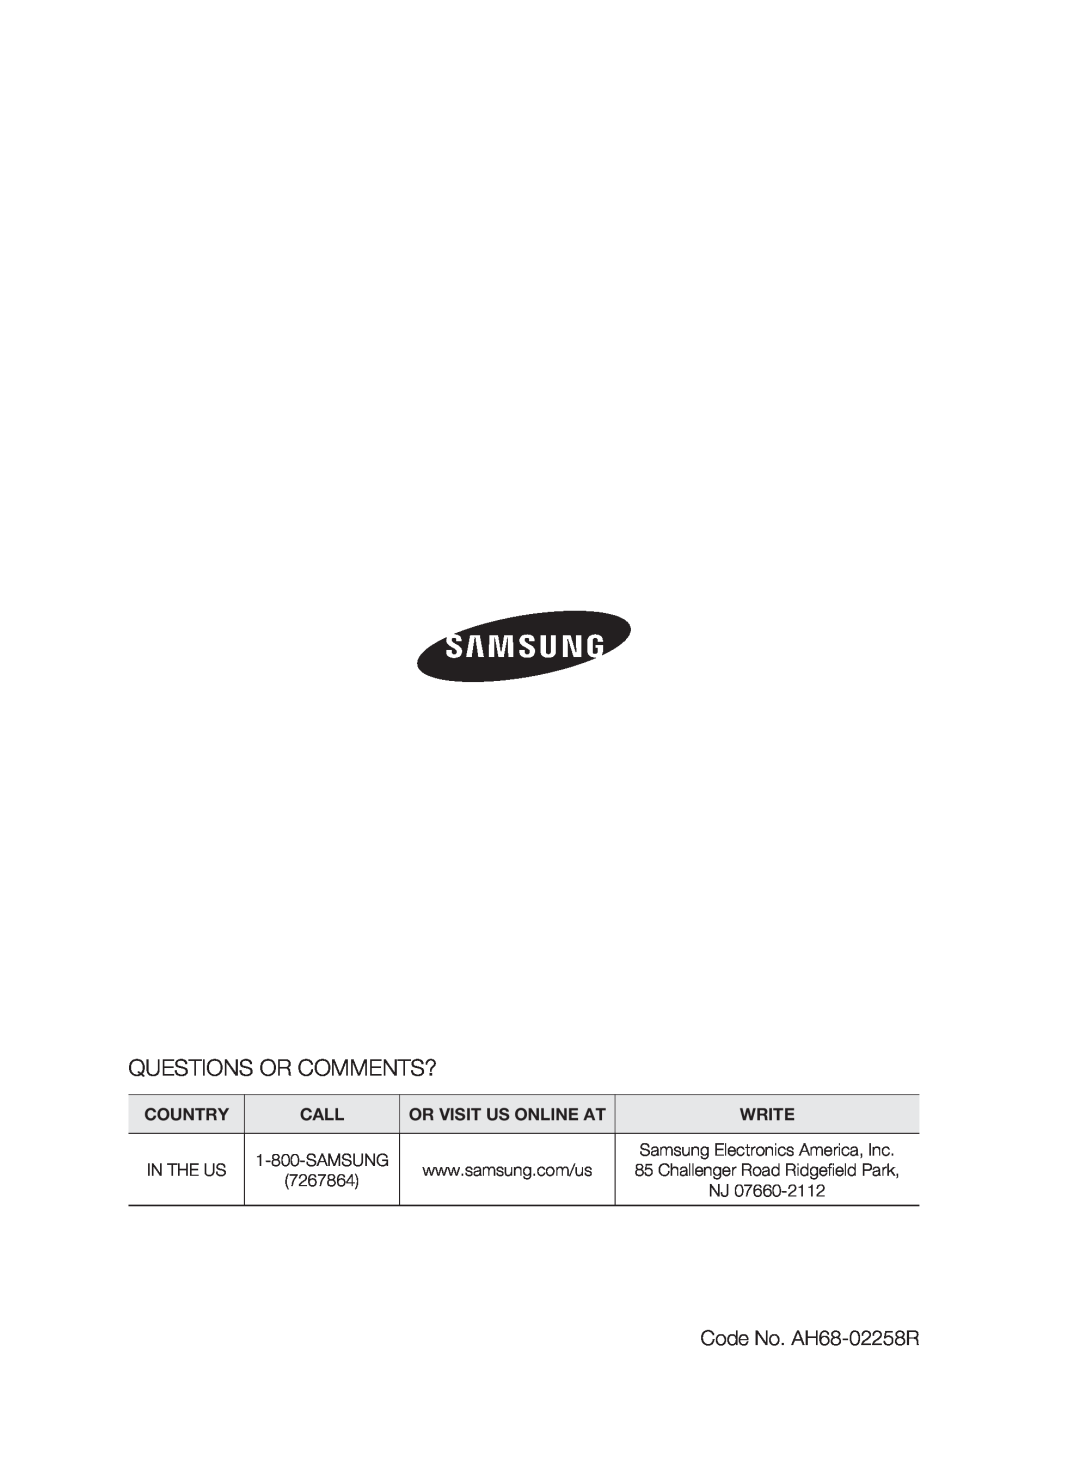 Samsung HT-C5500 user manual Questions Or Comments?, Code No. AH68-02258R, Country, Call, Or Visit Us Online At, Write 